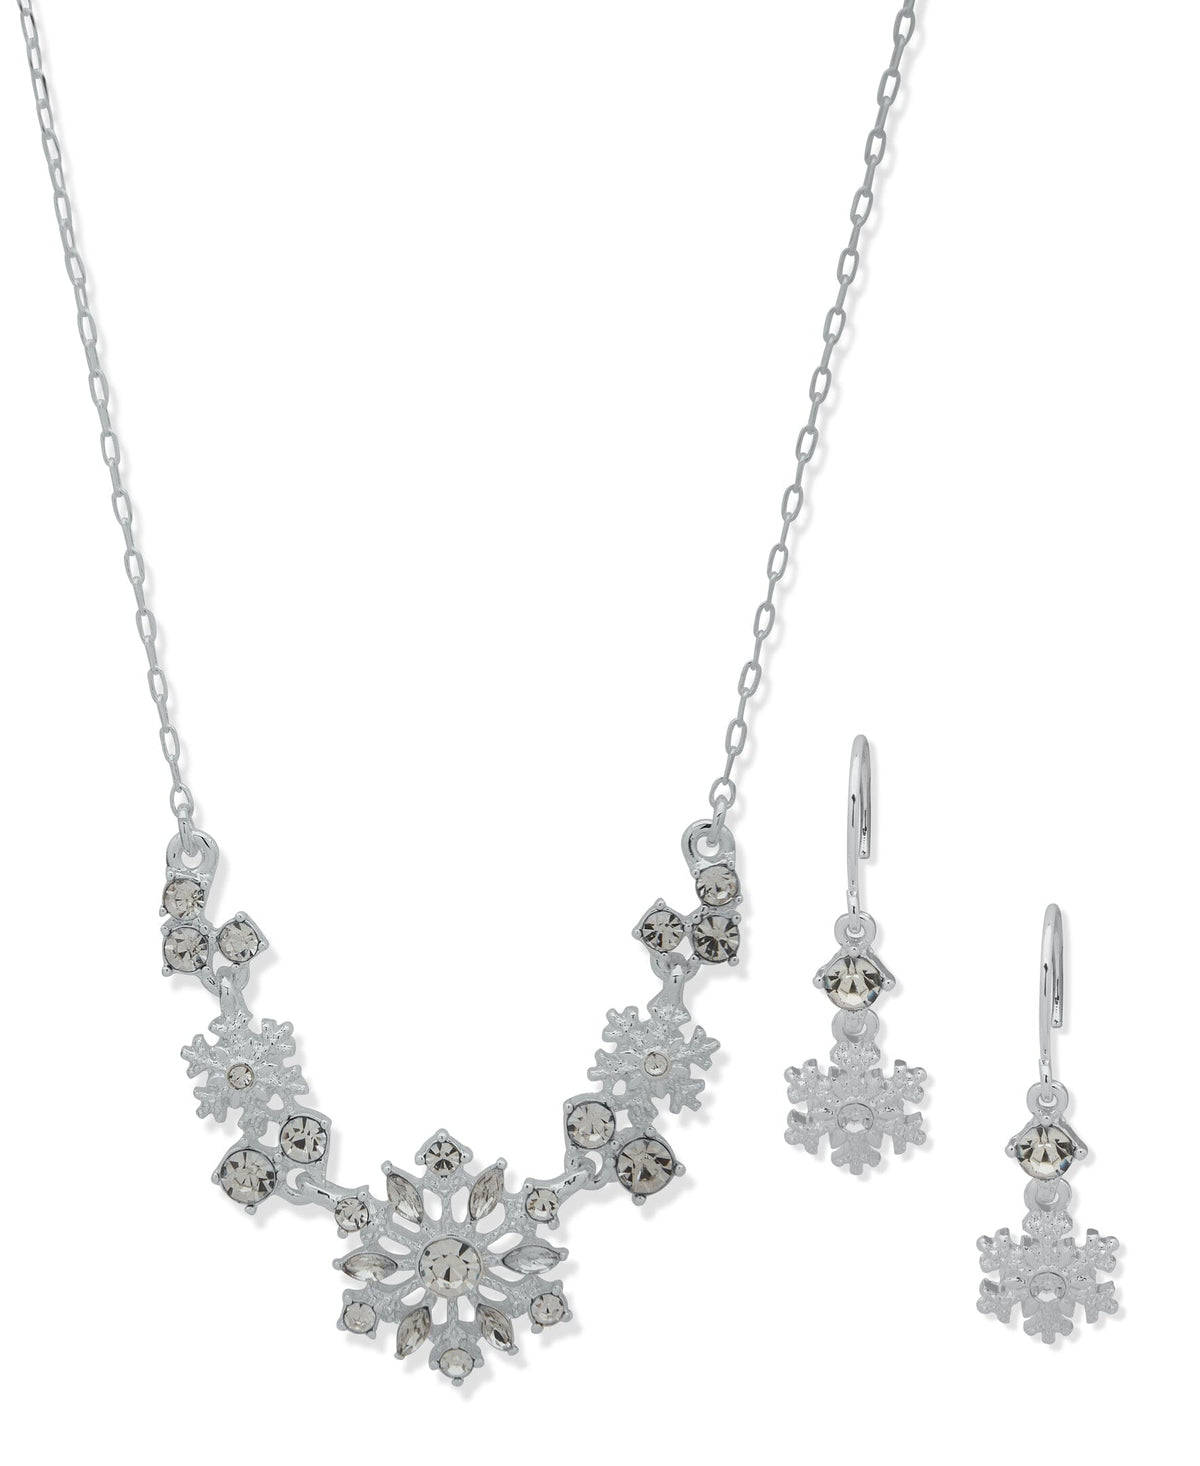 Anne Klein Silver Tone Crystal Snowflake Necklace and Earring Set